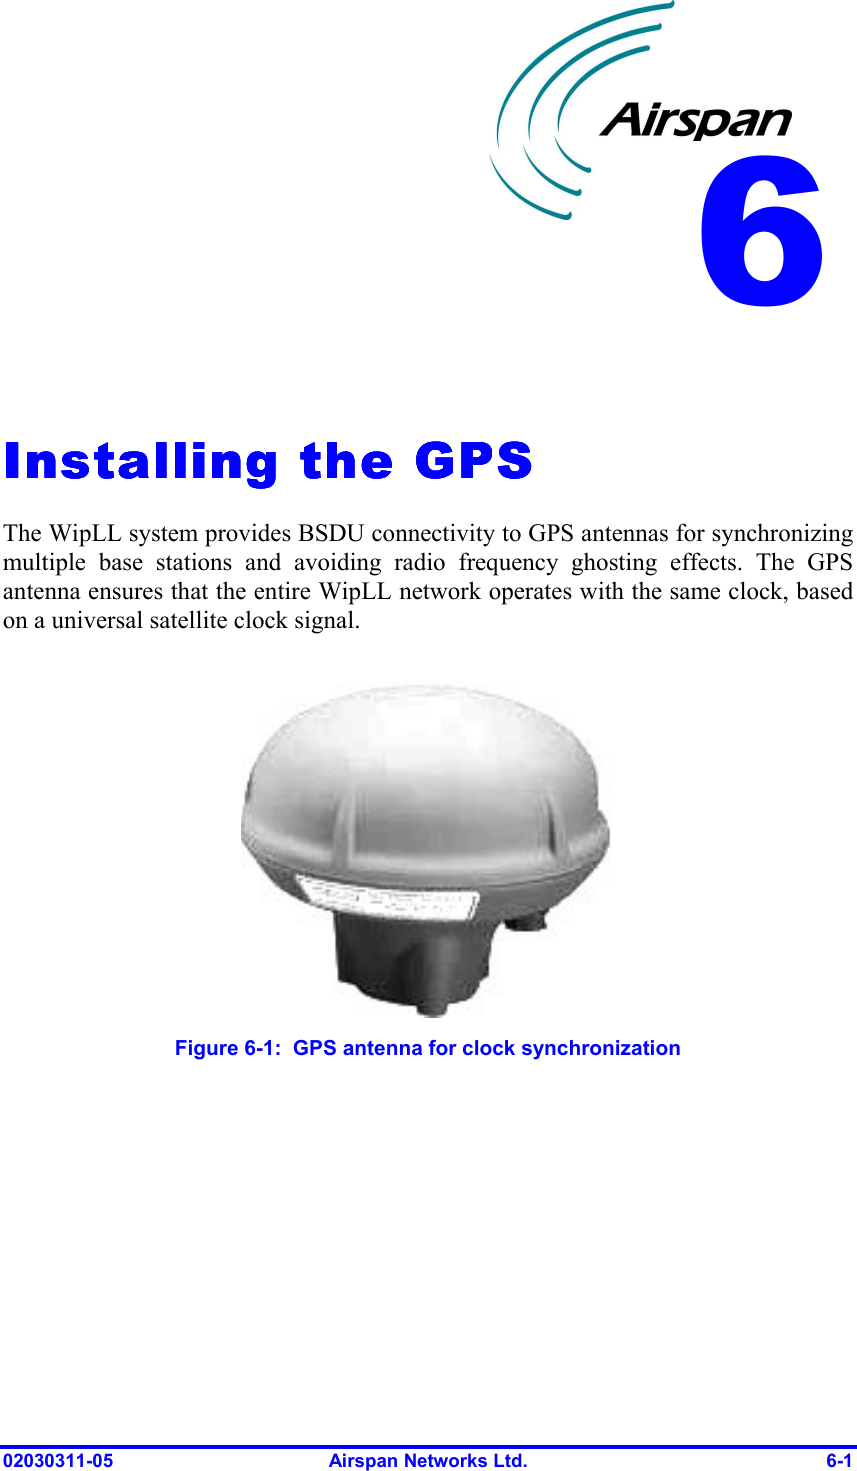  02030311-05  Airspan Networks Ltd.  6-1   Installing the GPSInstalling the GPSInstalling the GPSInstalling the GPS    The WipLL system provides BSDU connectivity to GPS antennas for synchronizing multiple base stations and avoiding radio frequency ghosting effects. The GPS antenna ensures that the entire WipLL network operates with the same clock, based on a universal satellite clock signal.   Figure  6-1:  GPS antenna for clock synchronization 6 